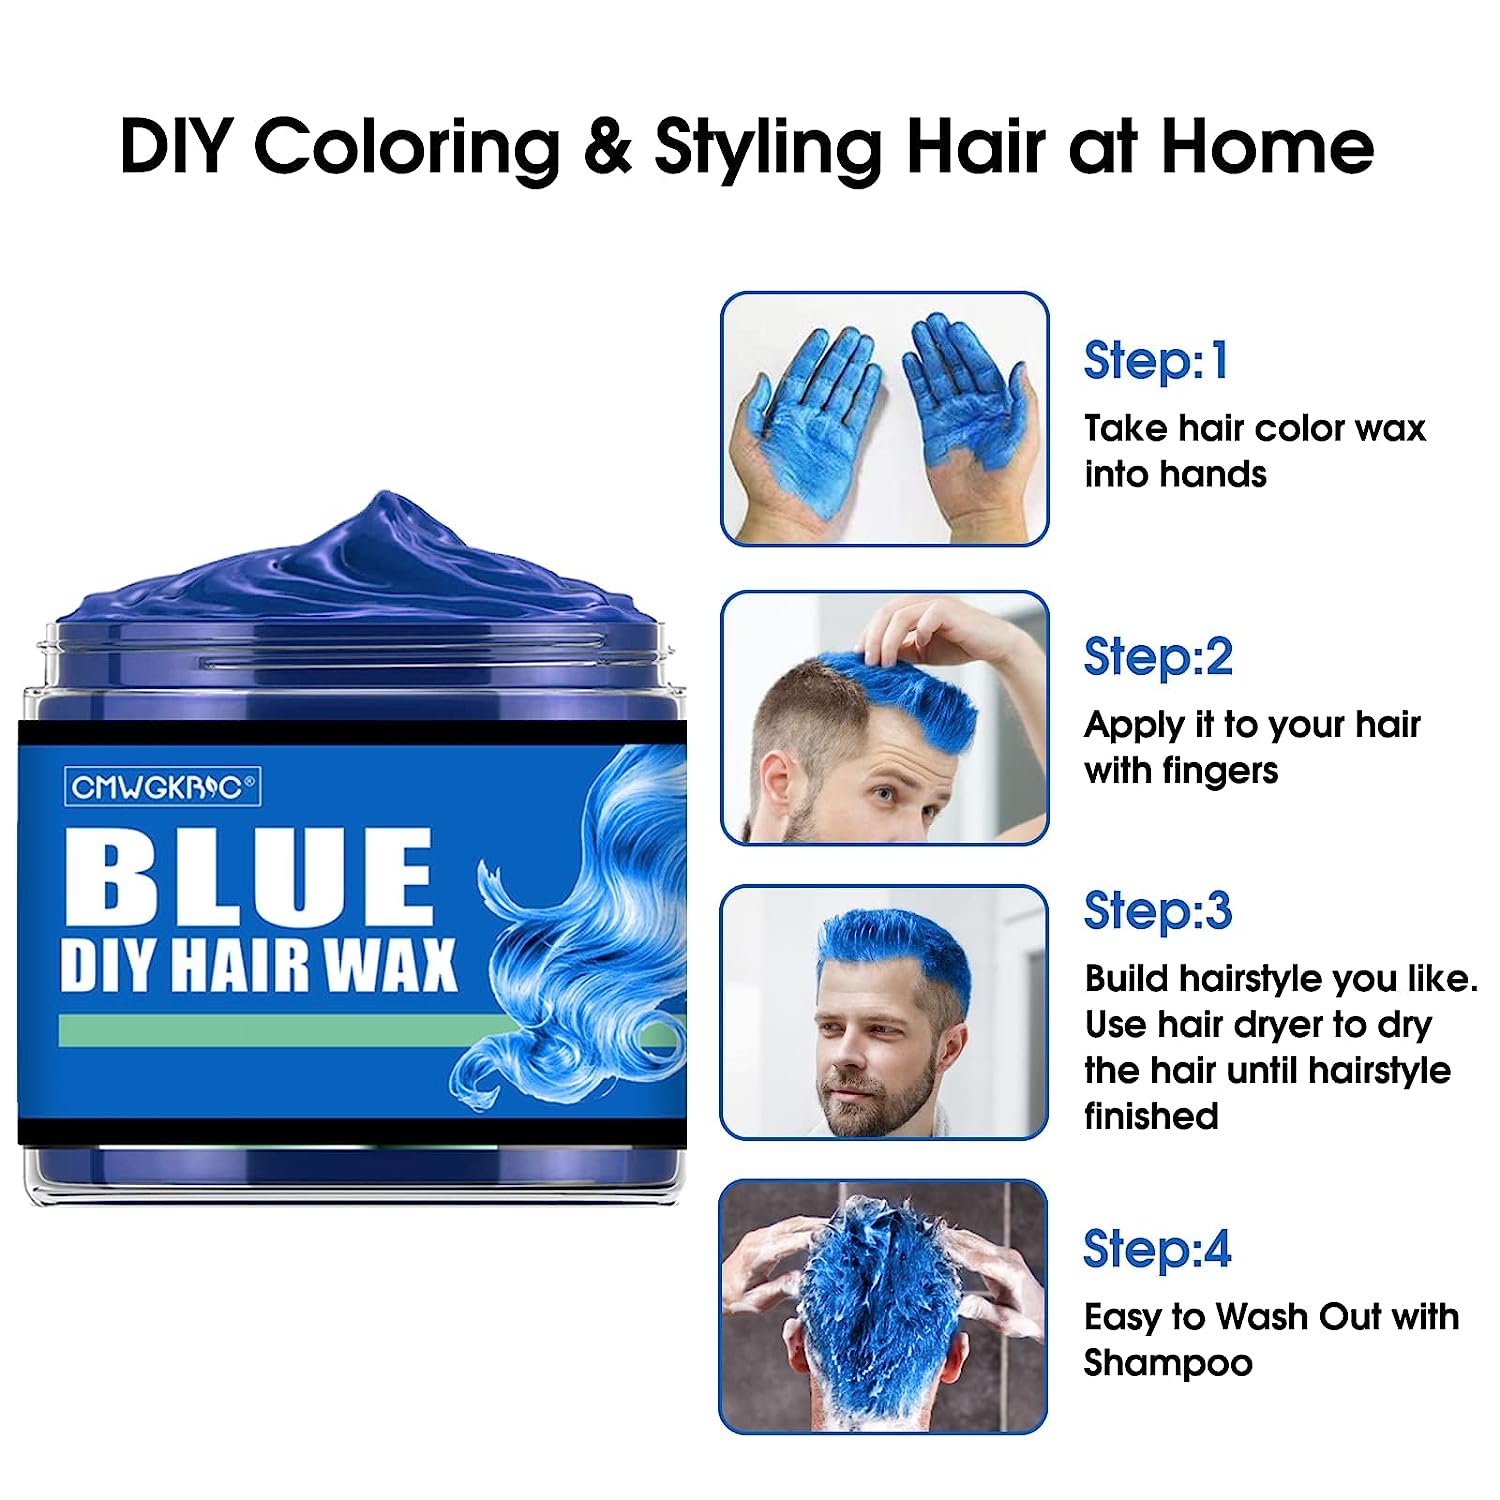 4 Colors Temporary Hair Color Wax,Blue Purple Pink Green Hair Dye Color Wax Washable Natural Instant Hair Color Cream DIY Hairstyle Temporary Hair Color Dye for Kids Men Women Halloween Party